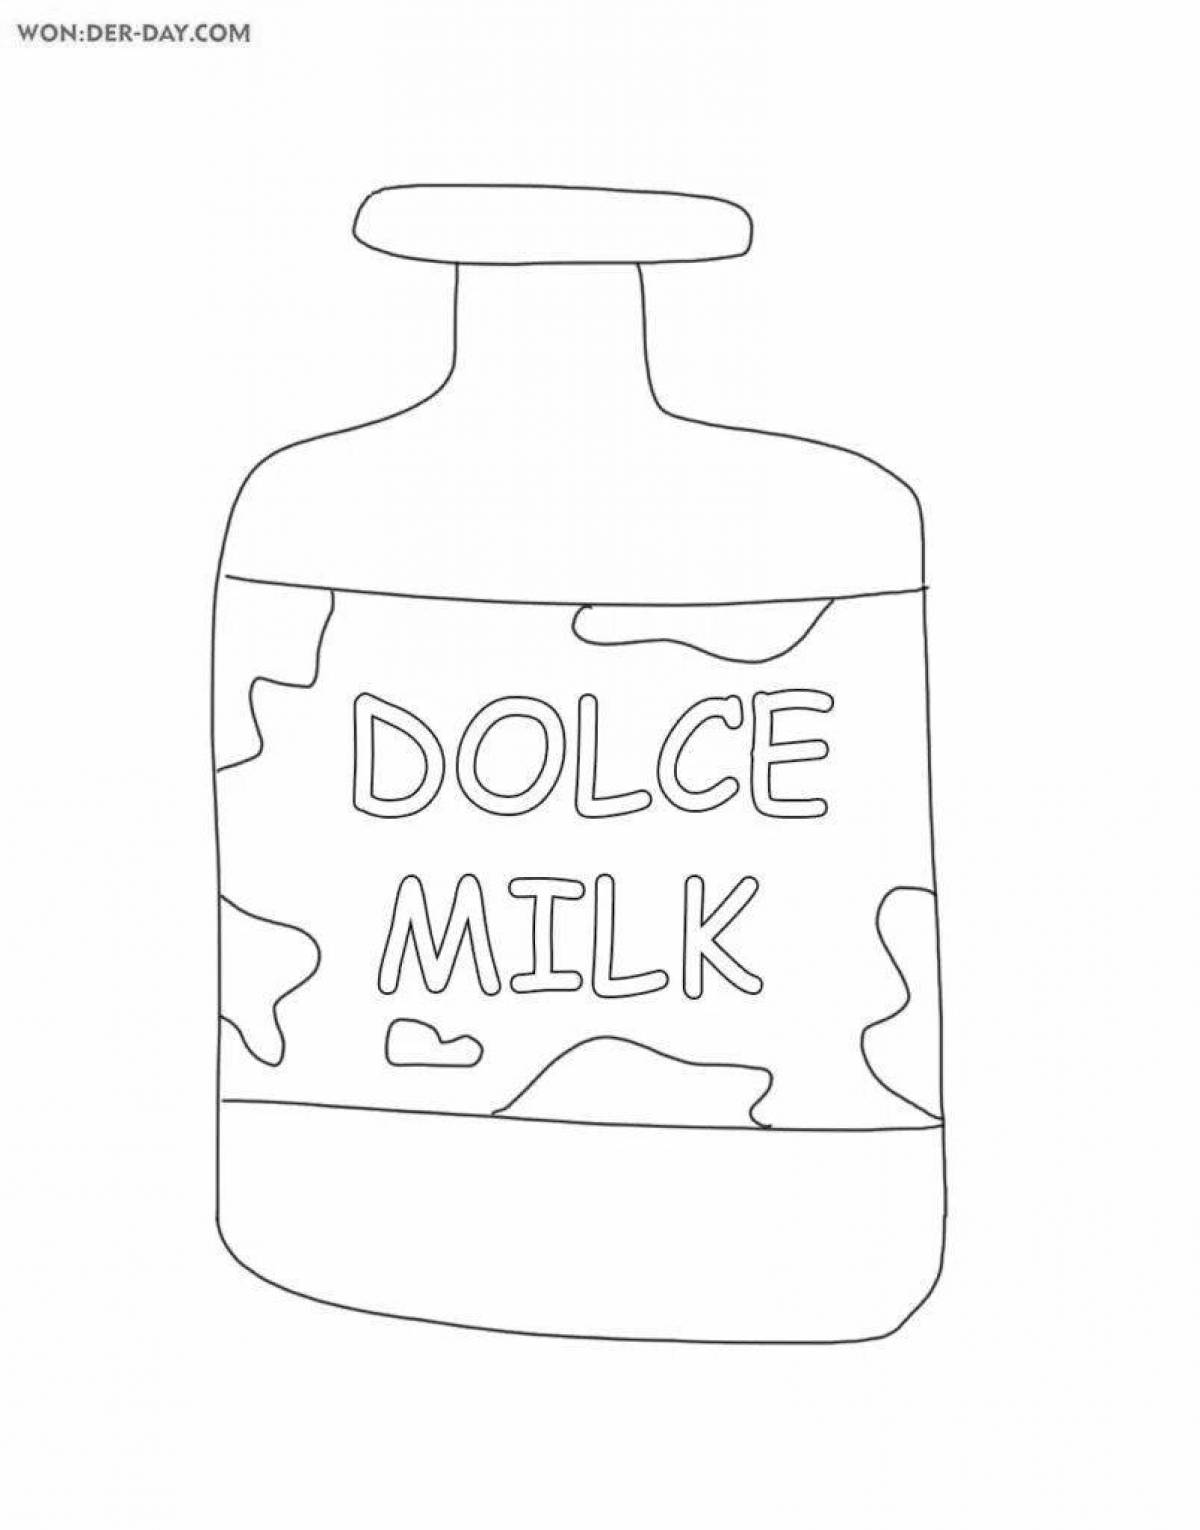 Coloring book shining milk cosmetics dolce